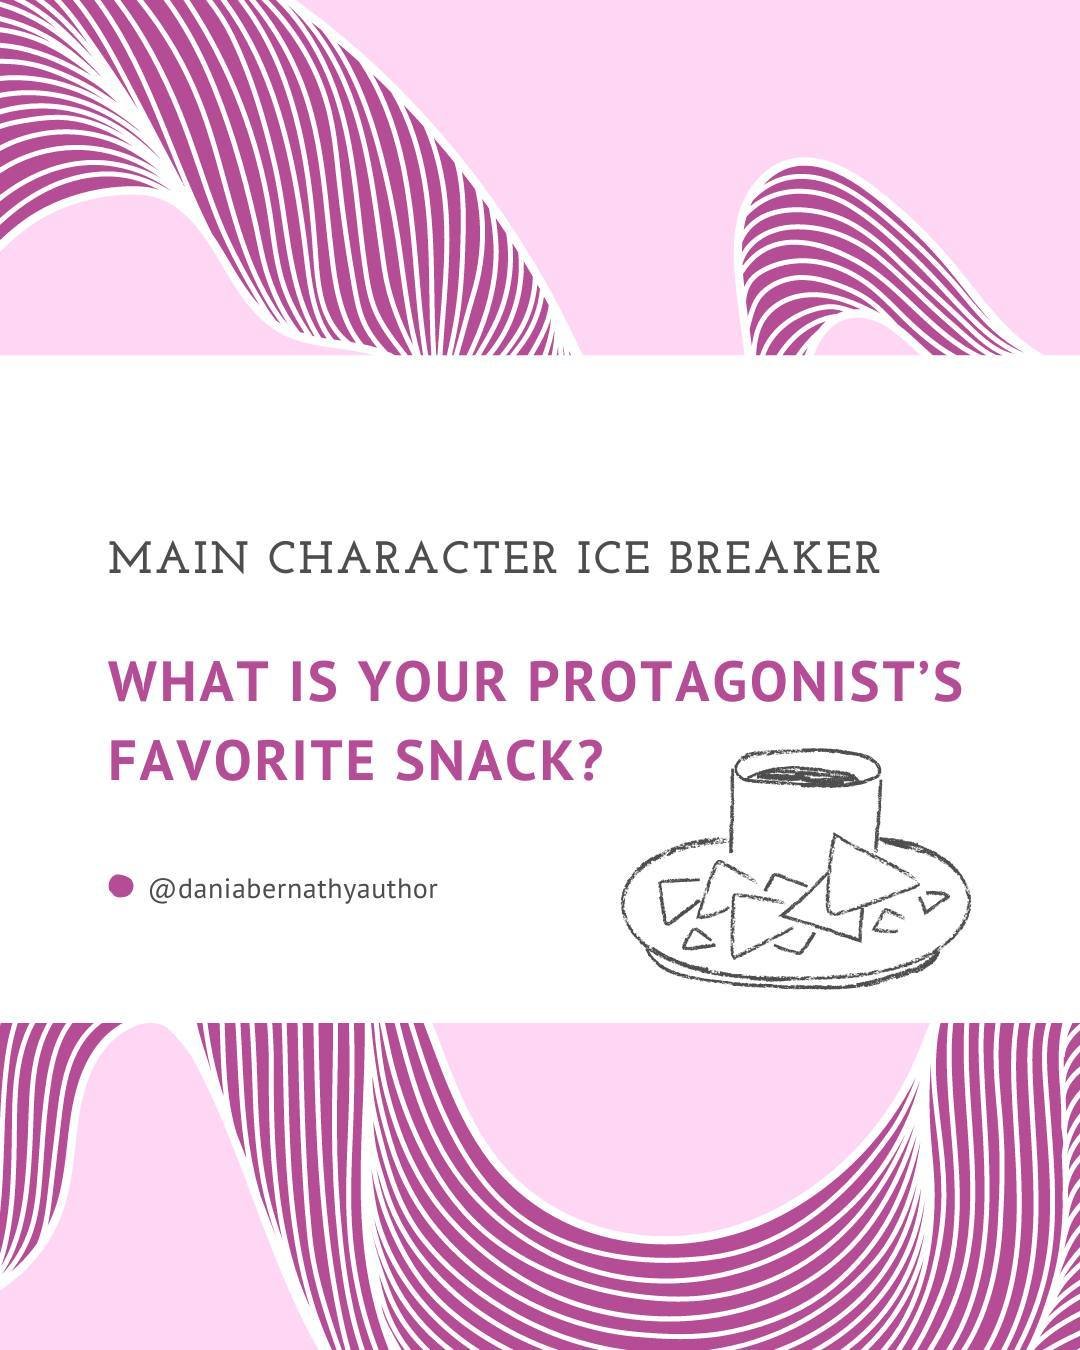 Are you feeling hungry? What about your protagonist?⁠
⁠
#WritingTips #BookCoach #BookCoaching #WritingAdvice #StoryCraft #WritingCraft #CreativeWriting #AspiringAuthor